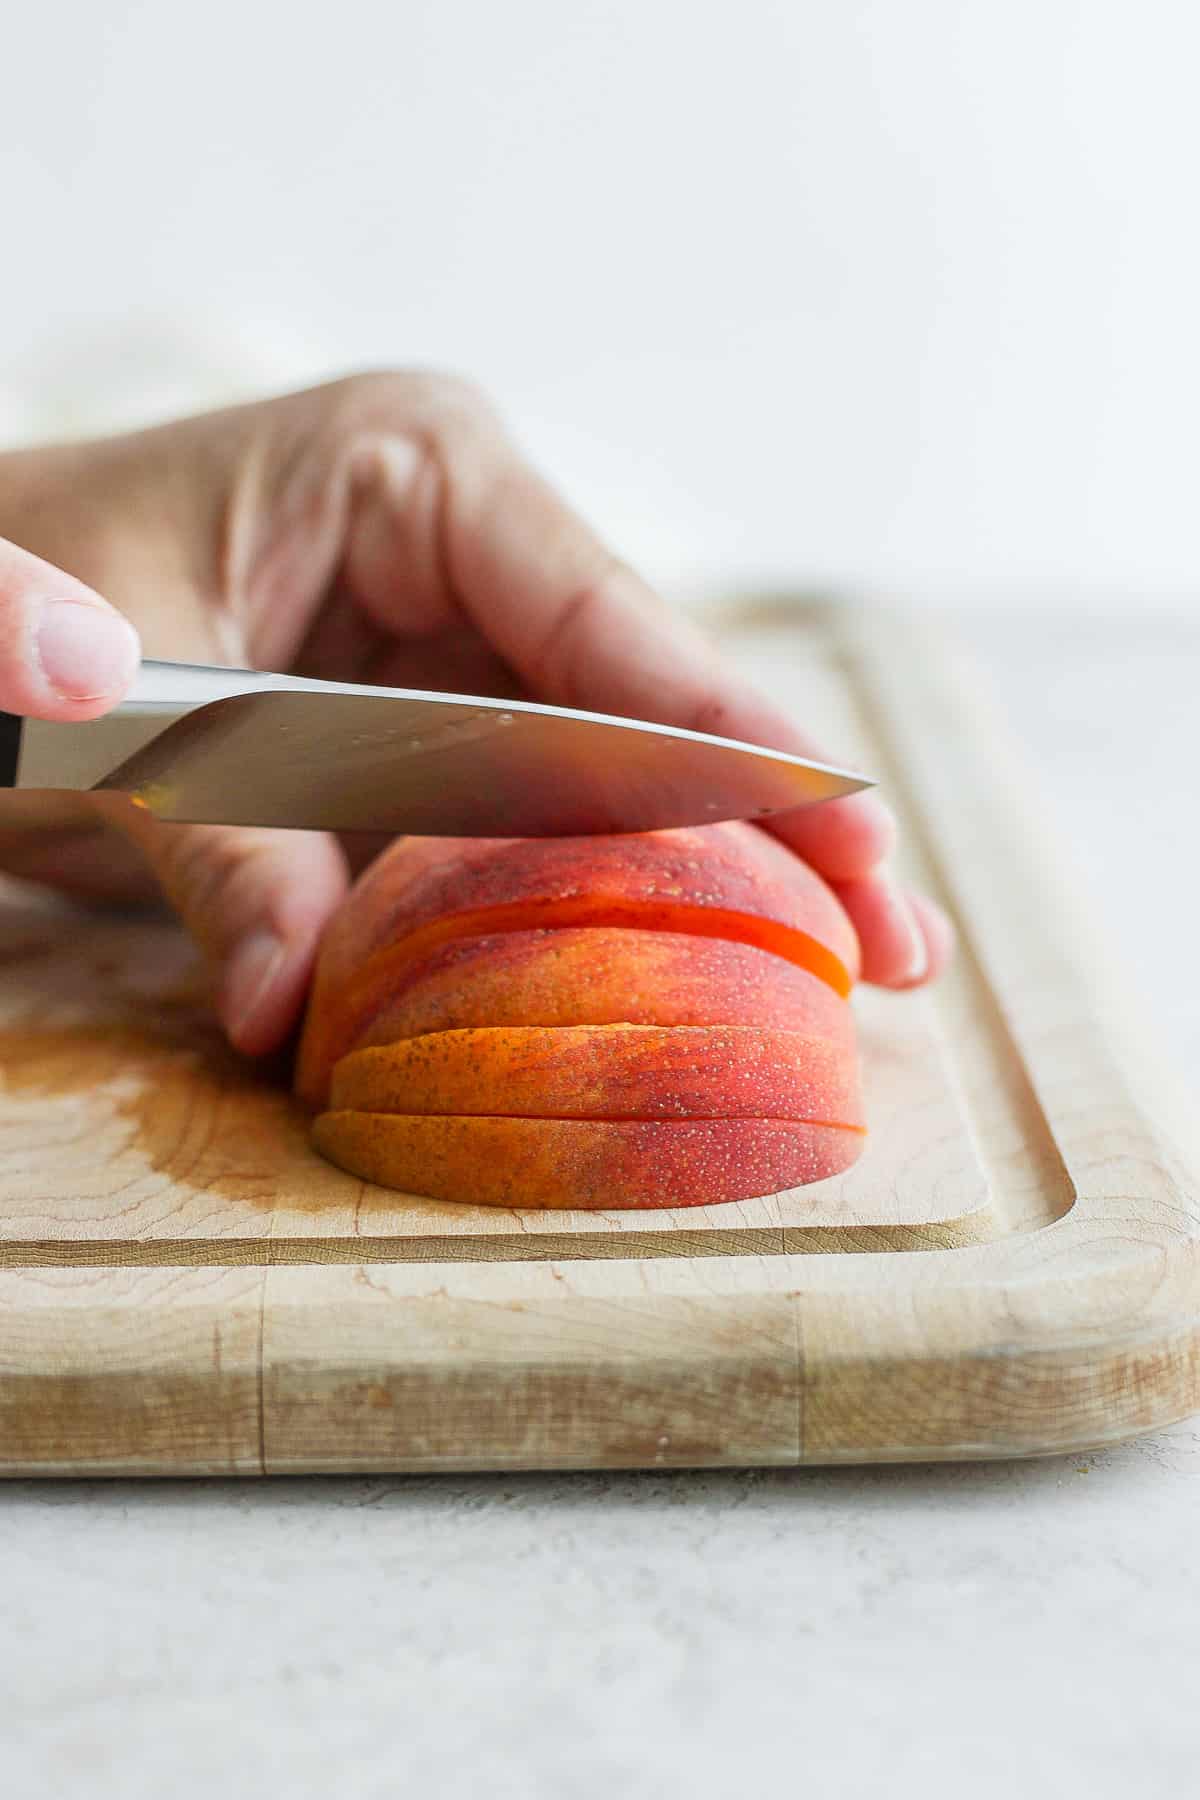 How to slice peach after it's cut in half